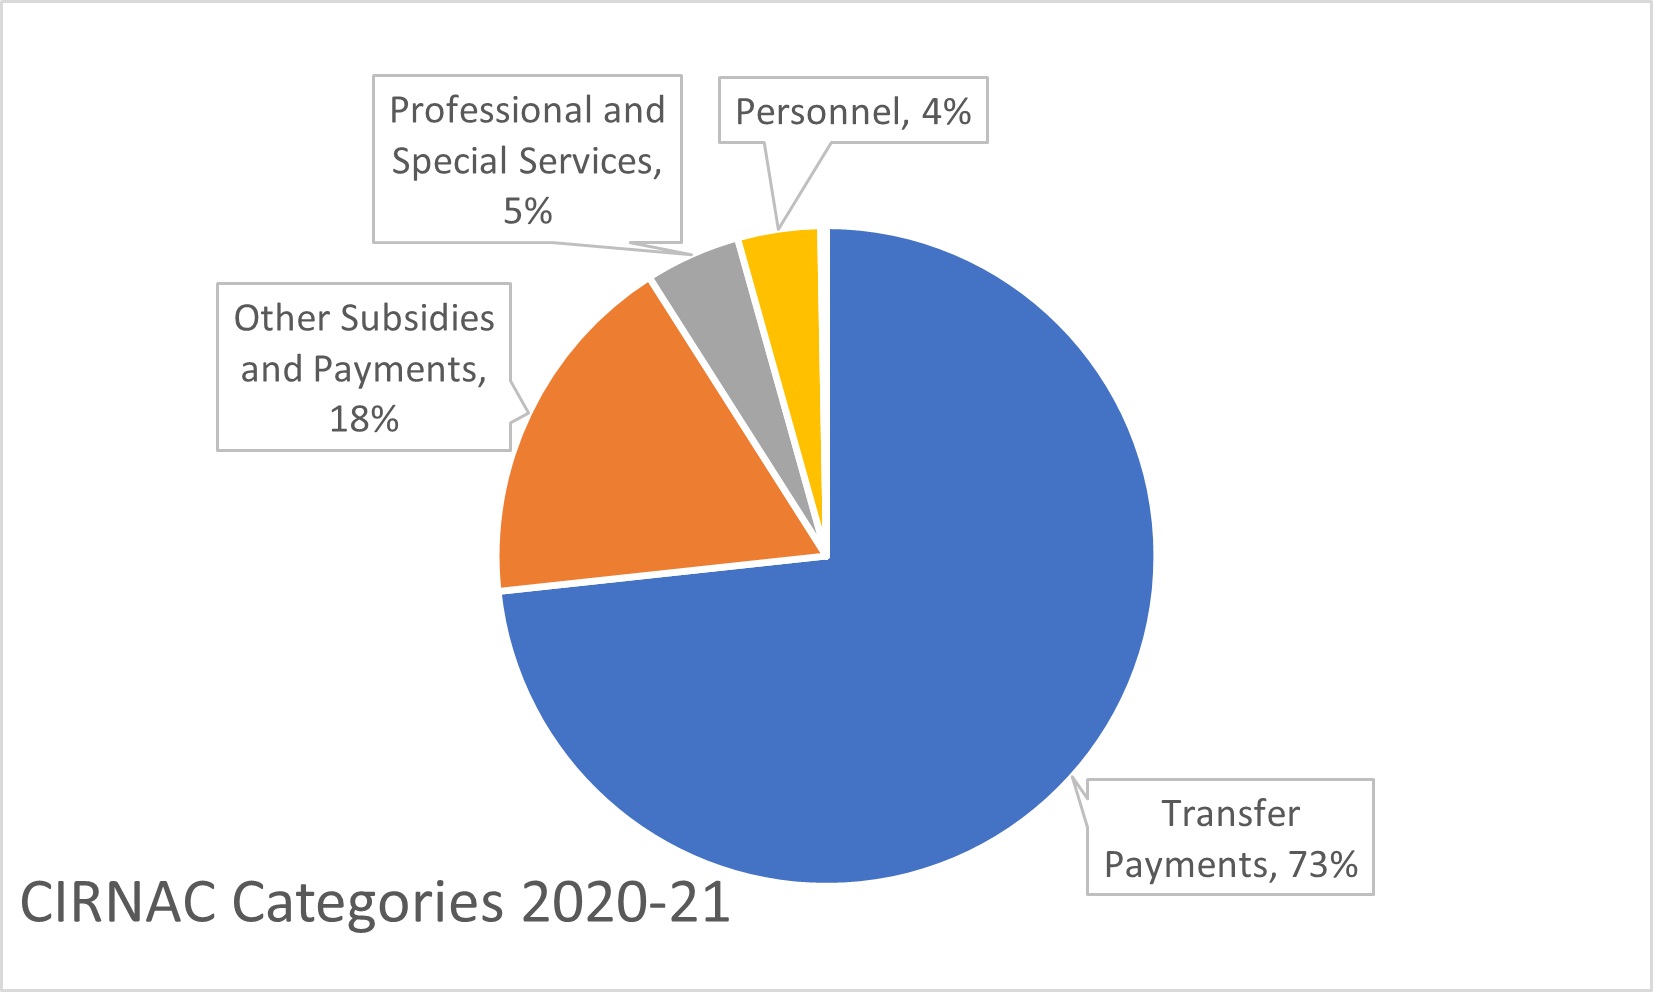 This pie chart shows that 73% of CIRNAC spending in 2020-2021 goes to Transfer Payments, 18% to other Payments, 5% to Professional and Special Services, and 4% to Personnel.